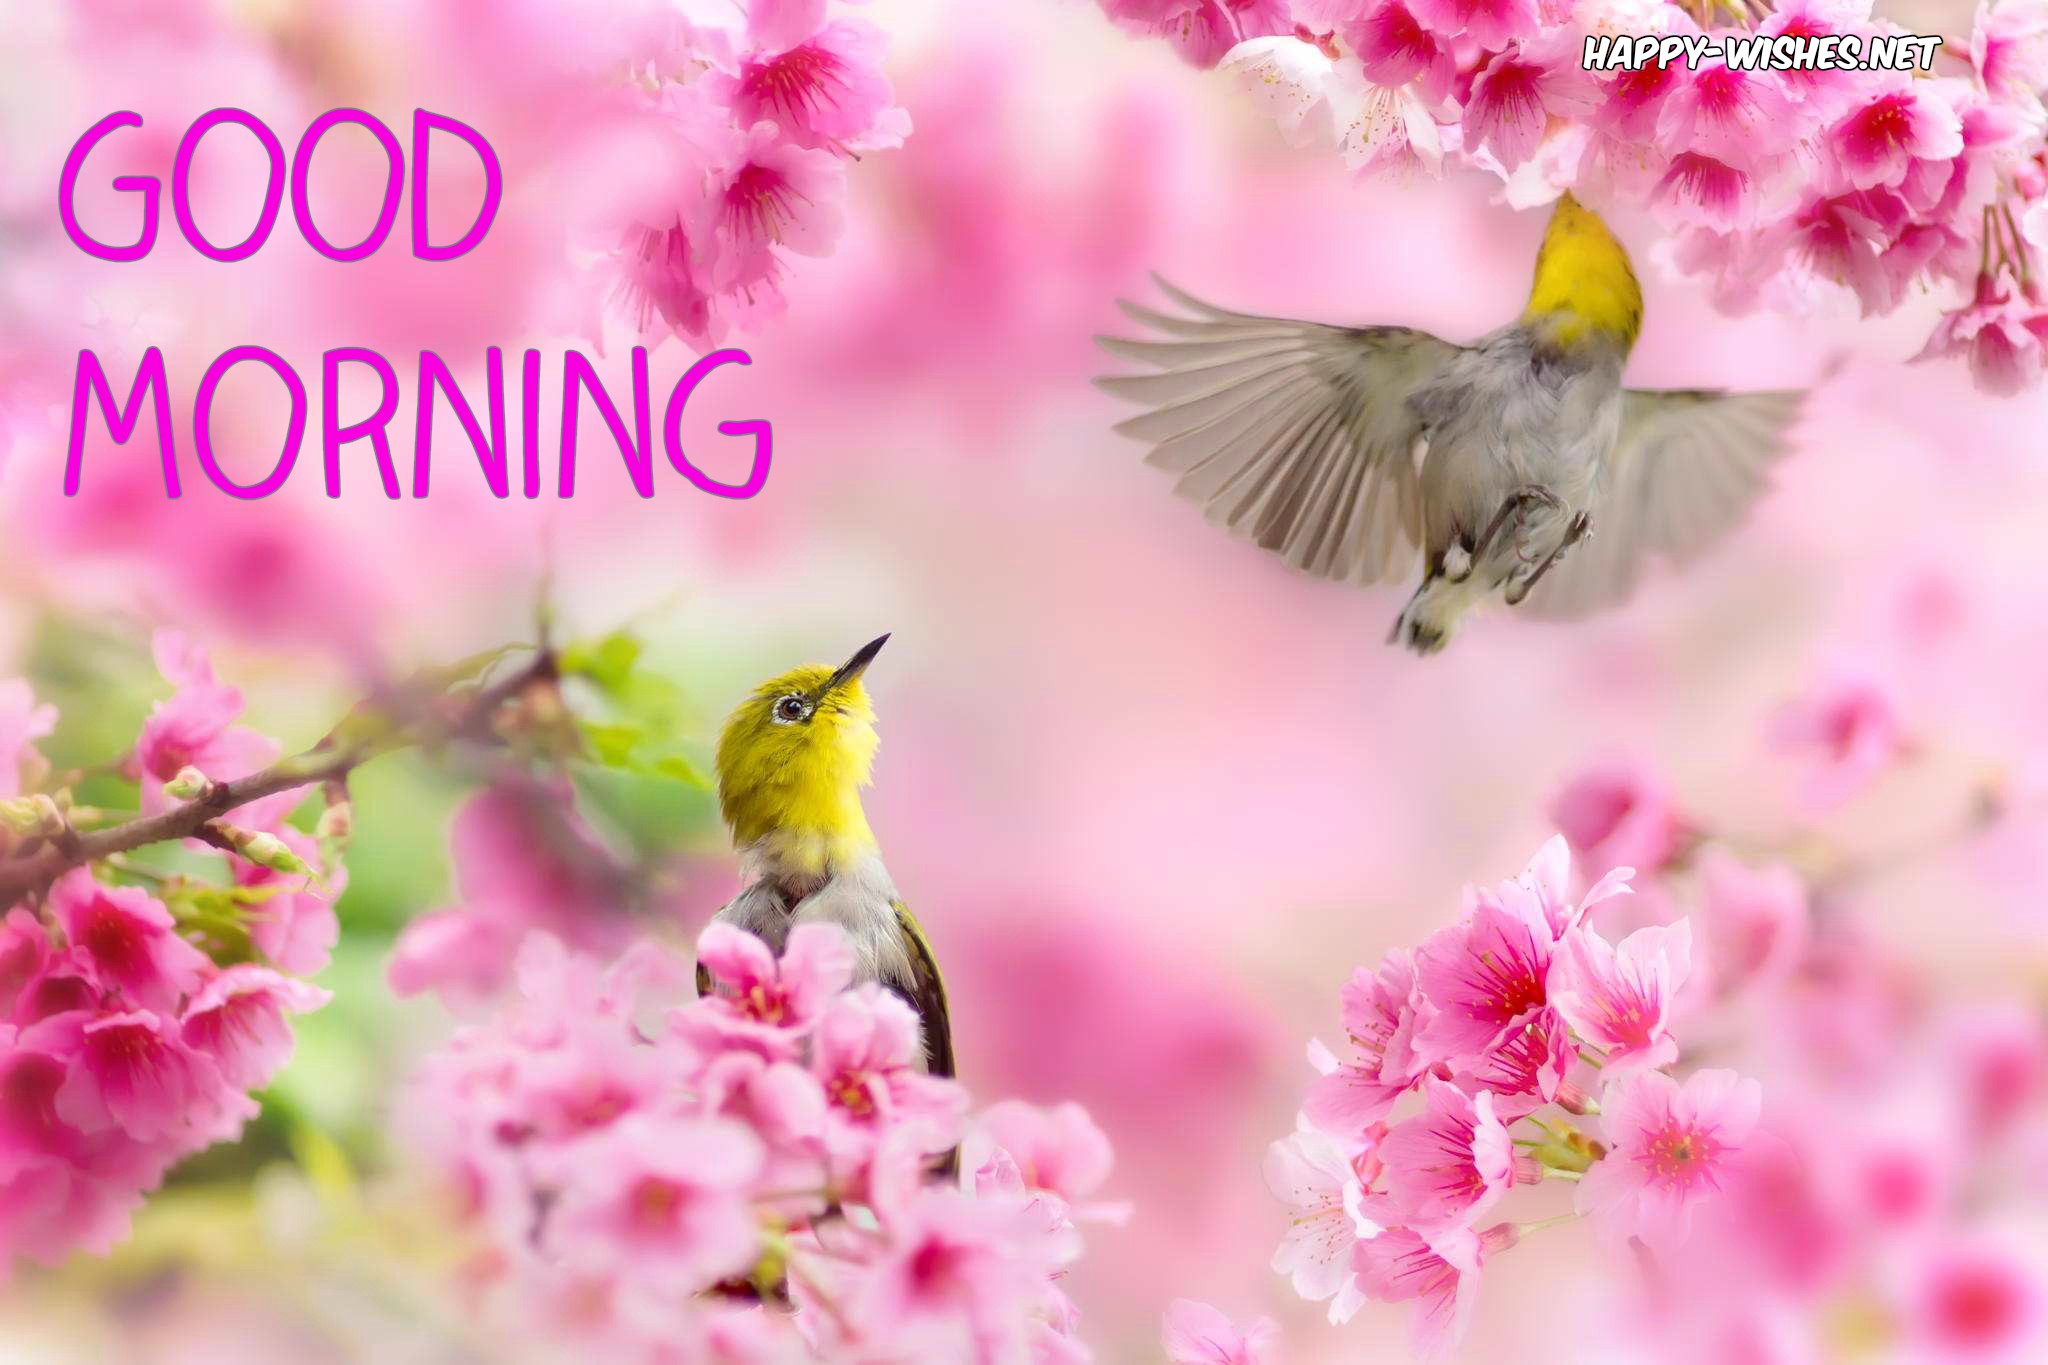 Good Morning-nature Images - Birds In Beautiful Spring Nature - HD Wallpaper 